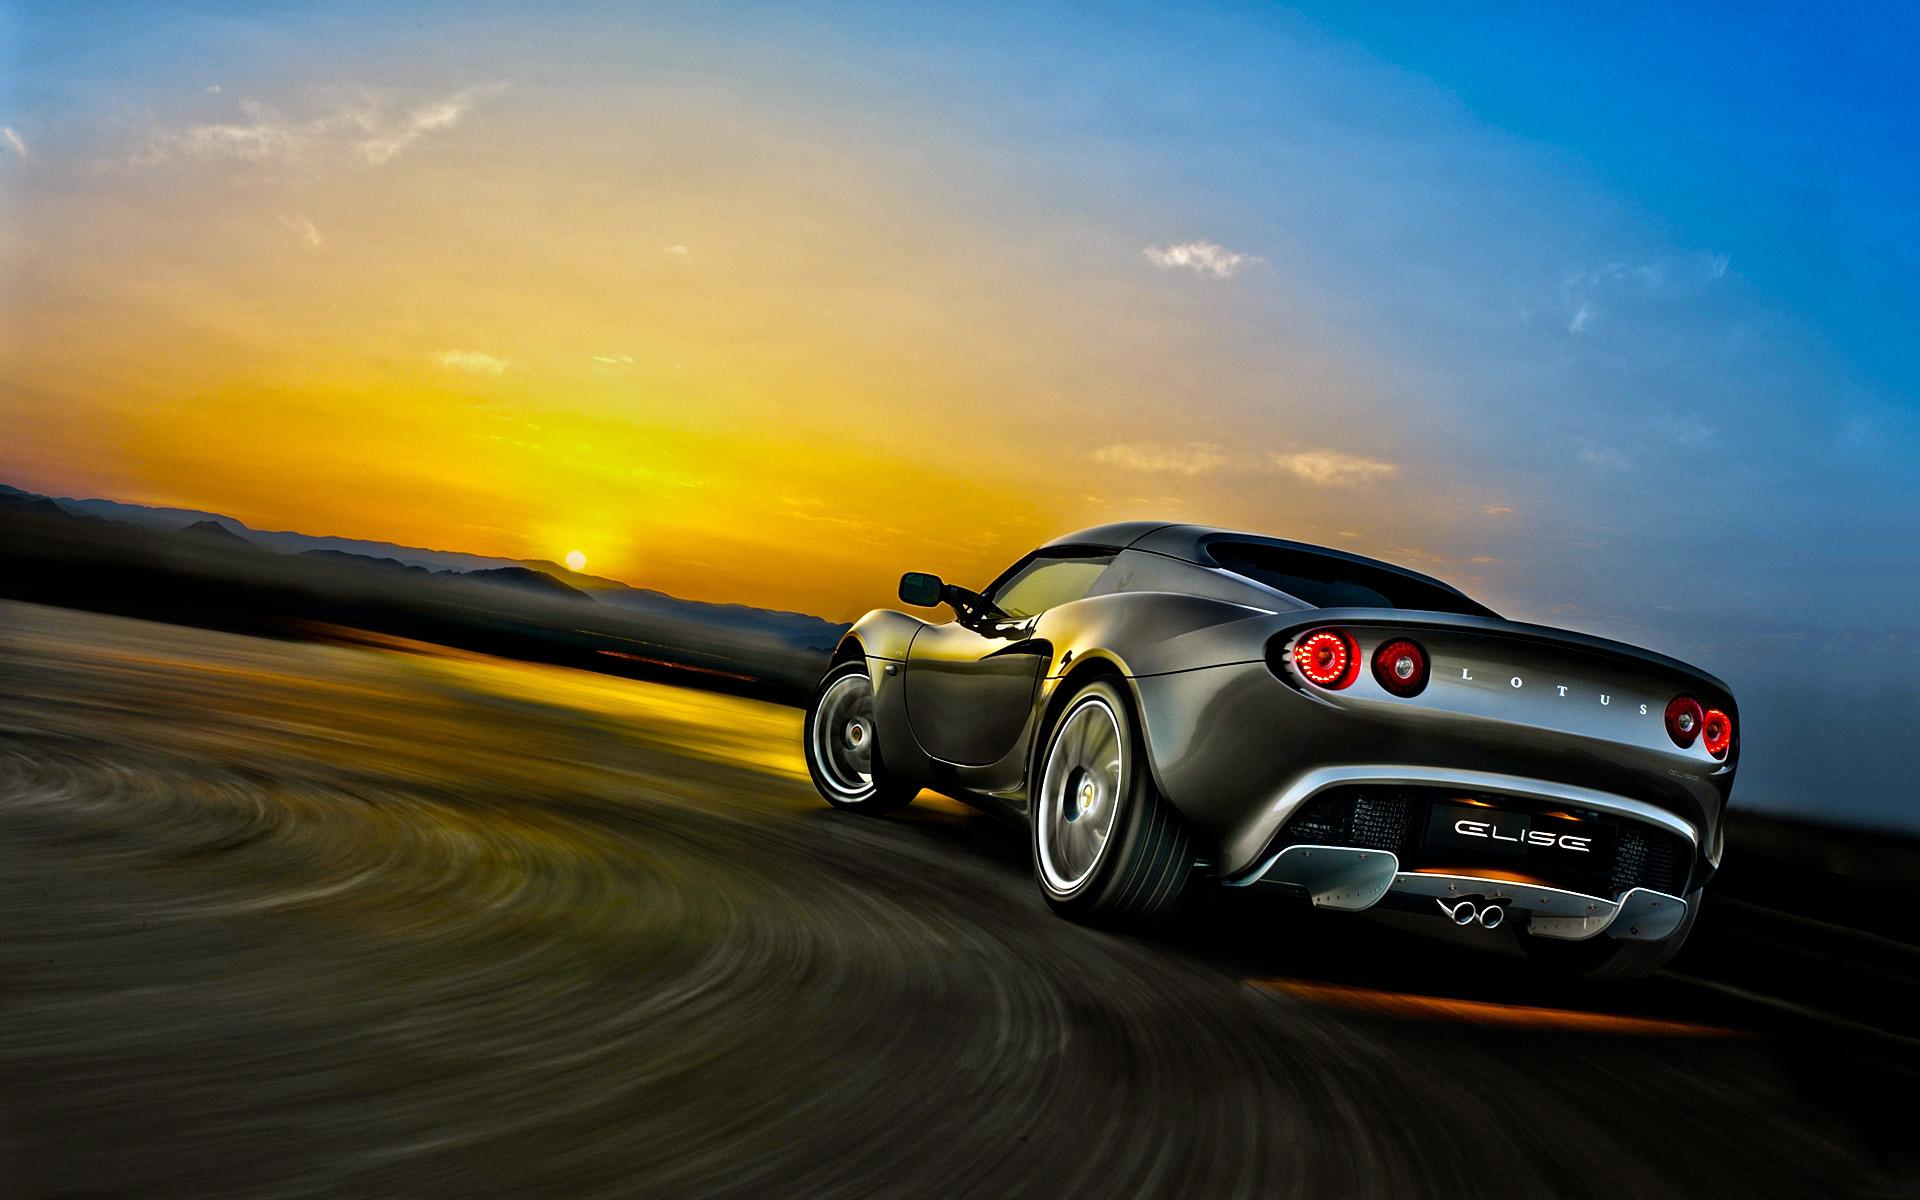 78 Awesome Lotus car wallpapers free download for Desktop Background Wallpaper